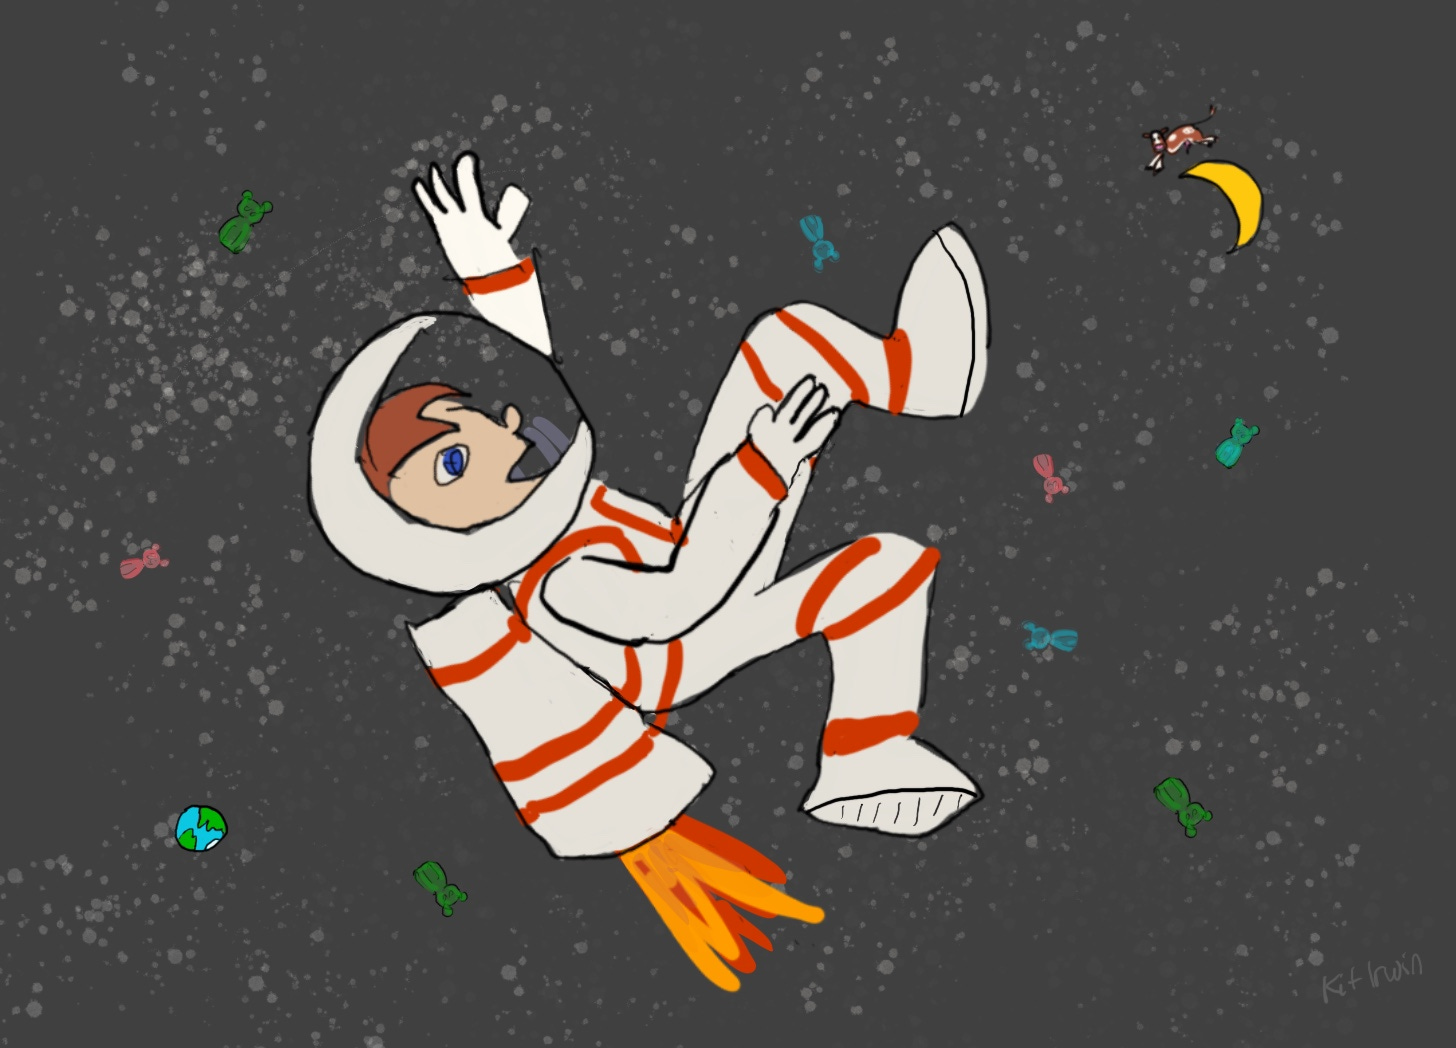 An astronaut floating in space with a jet pack on his back. The earth is small. A cow is jumping over a sliver of a moon. The sky is black and filled with stars and some floating gummy bears.